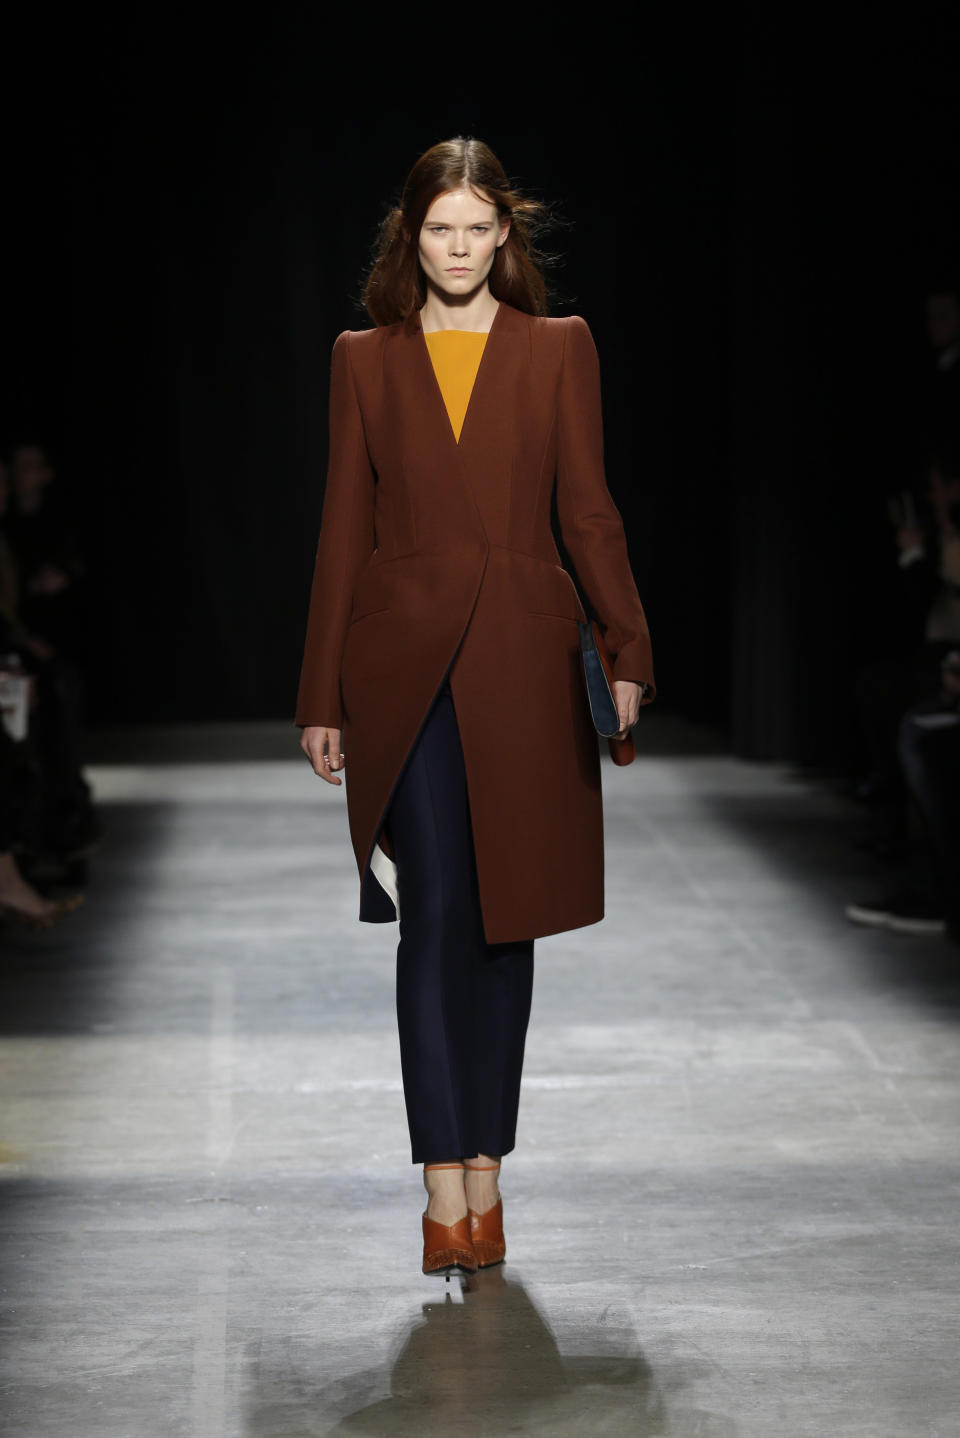 The Narciso Rodriguez Fall 2013 collection is modeled during Fashion Week in New York, Tuesday, Feb. 12, 2013. (AP Photo/Seth Wenig)